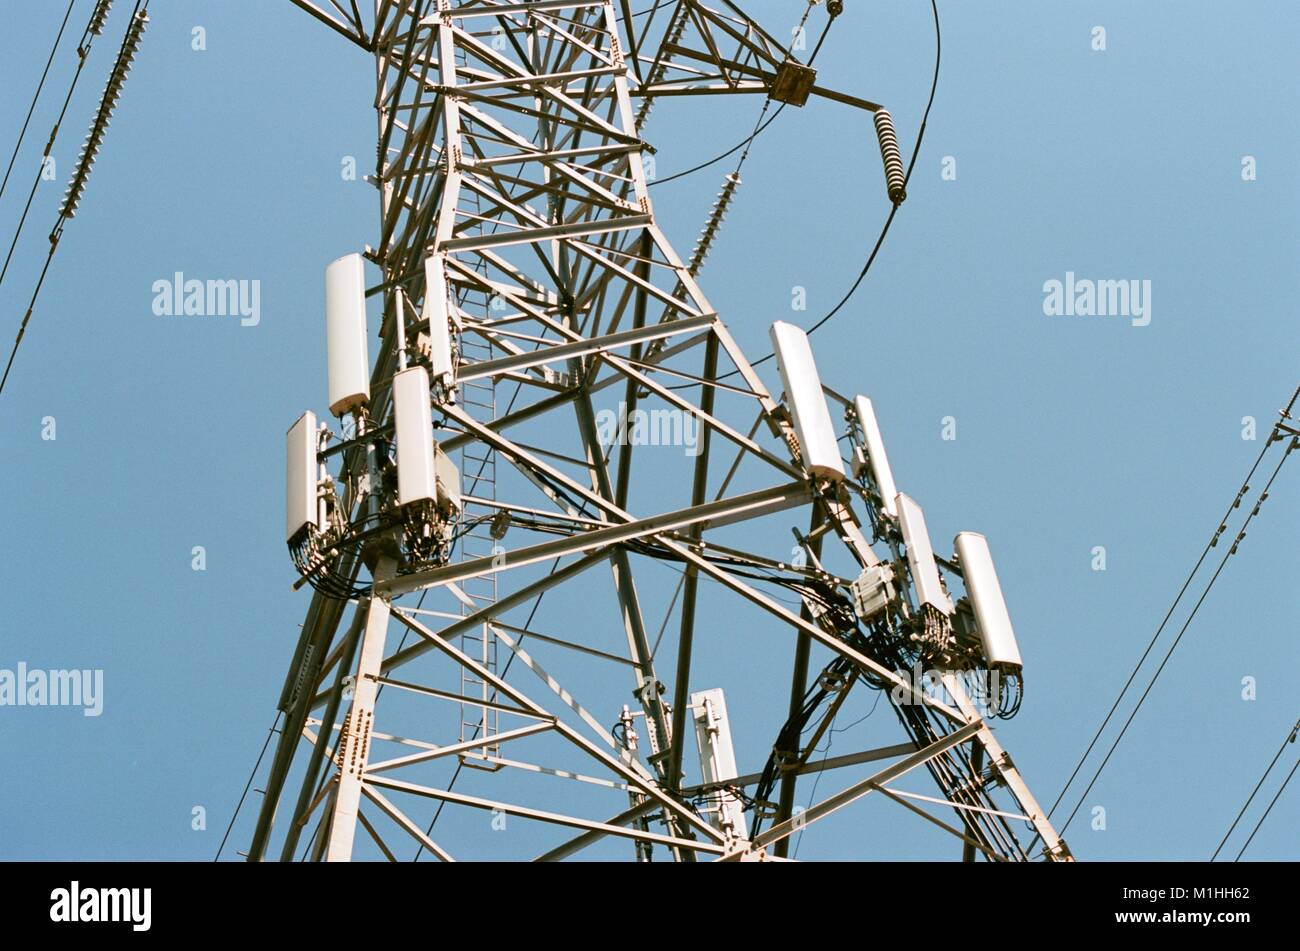 Cellular telephone transmission tower (cellphone) antennas and other hardware are installed on the side of a high tension electrical pylon in the Silicon Valley, Fremont, California, August 17, 2017. () Stock Photo